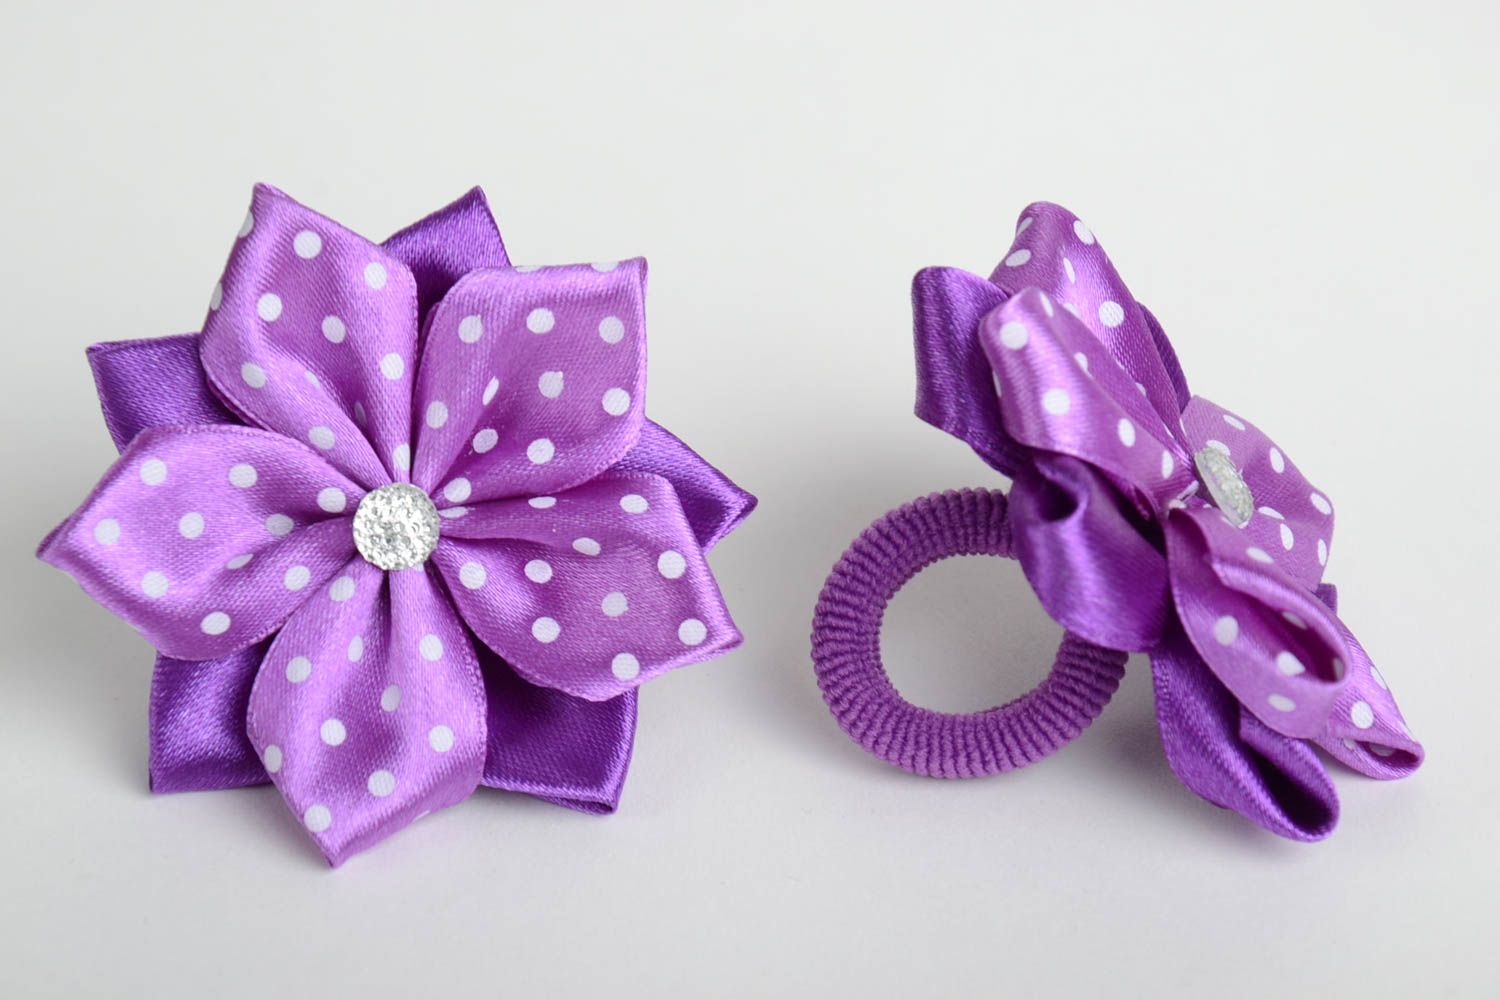 Handmade hair clips with violet satin ribbon kanzashi flowers set of 2 items photo 4